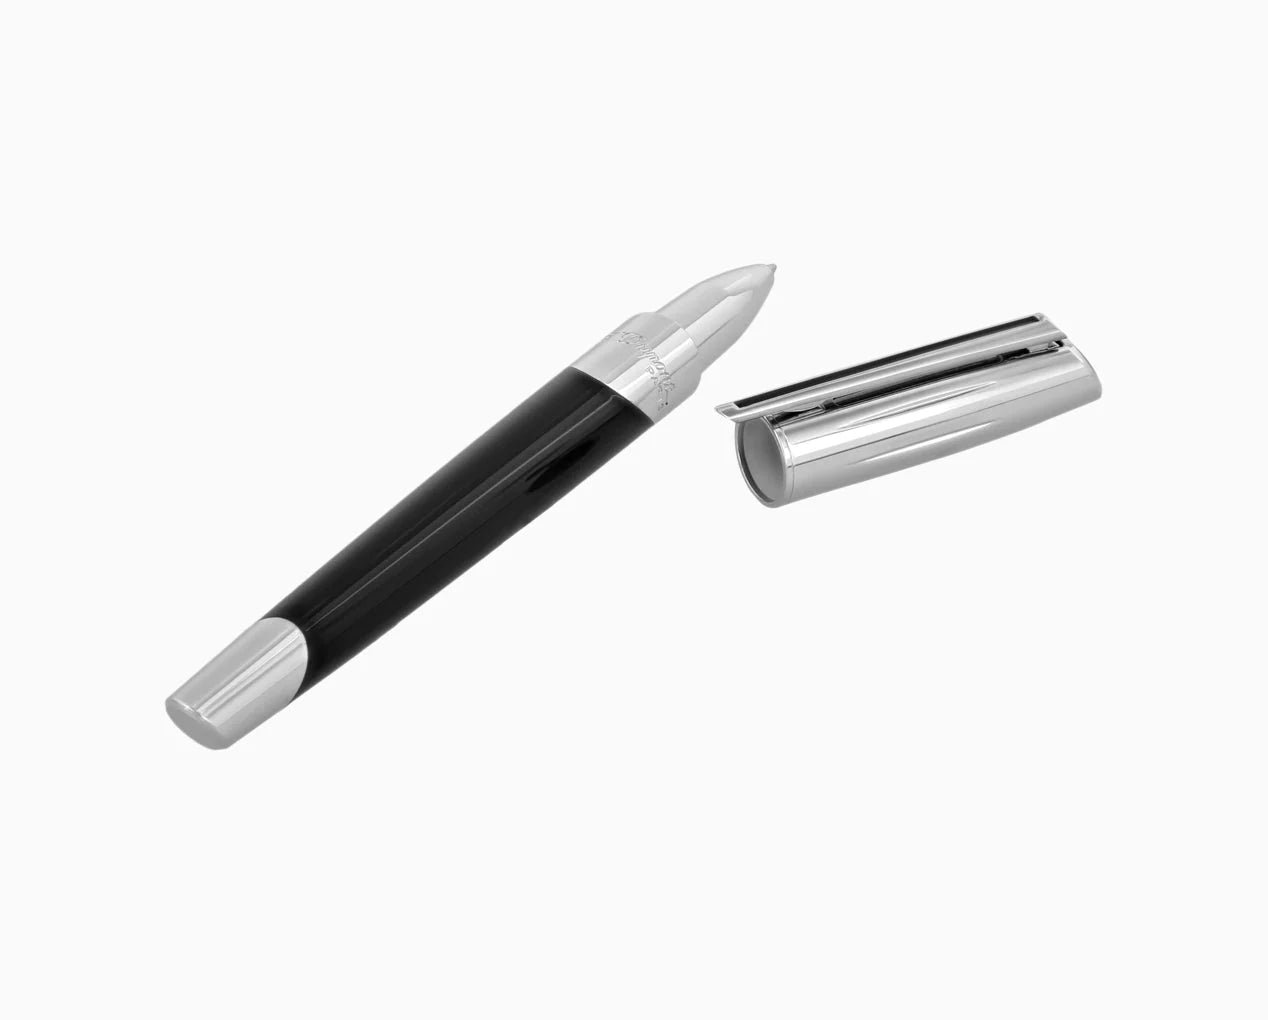 S.T. Dupont Defi Millennium Silver And Black Rollerball Pen